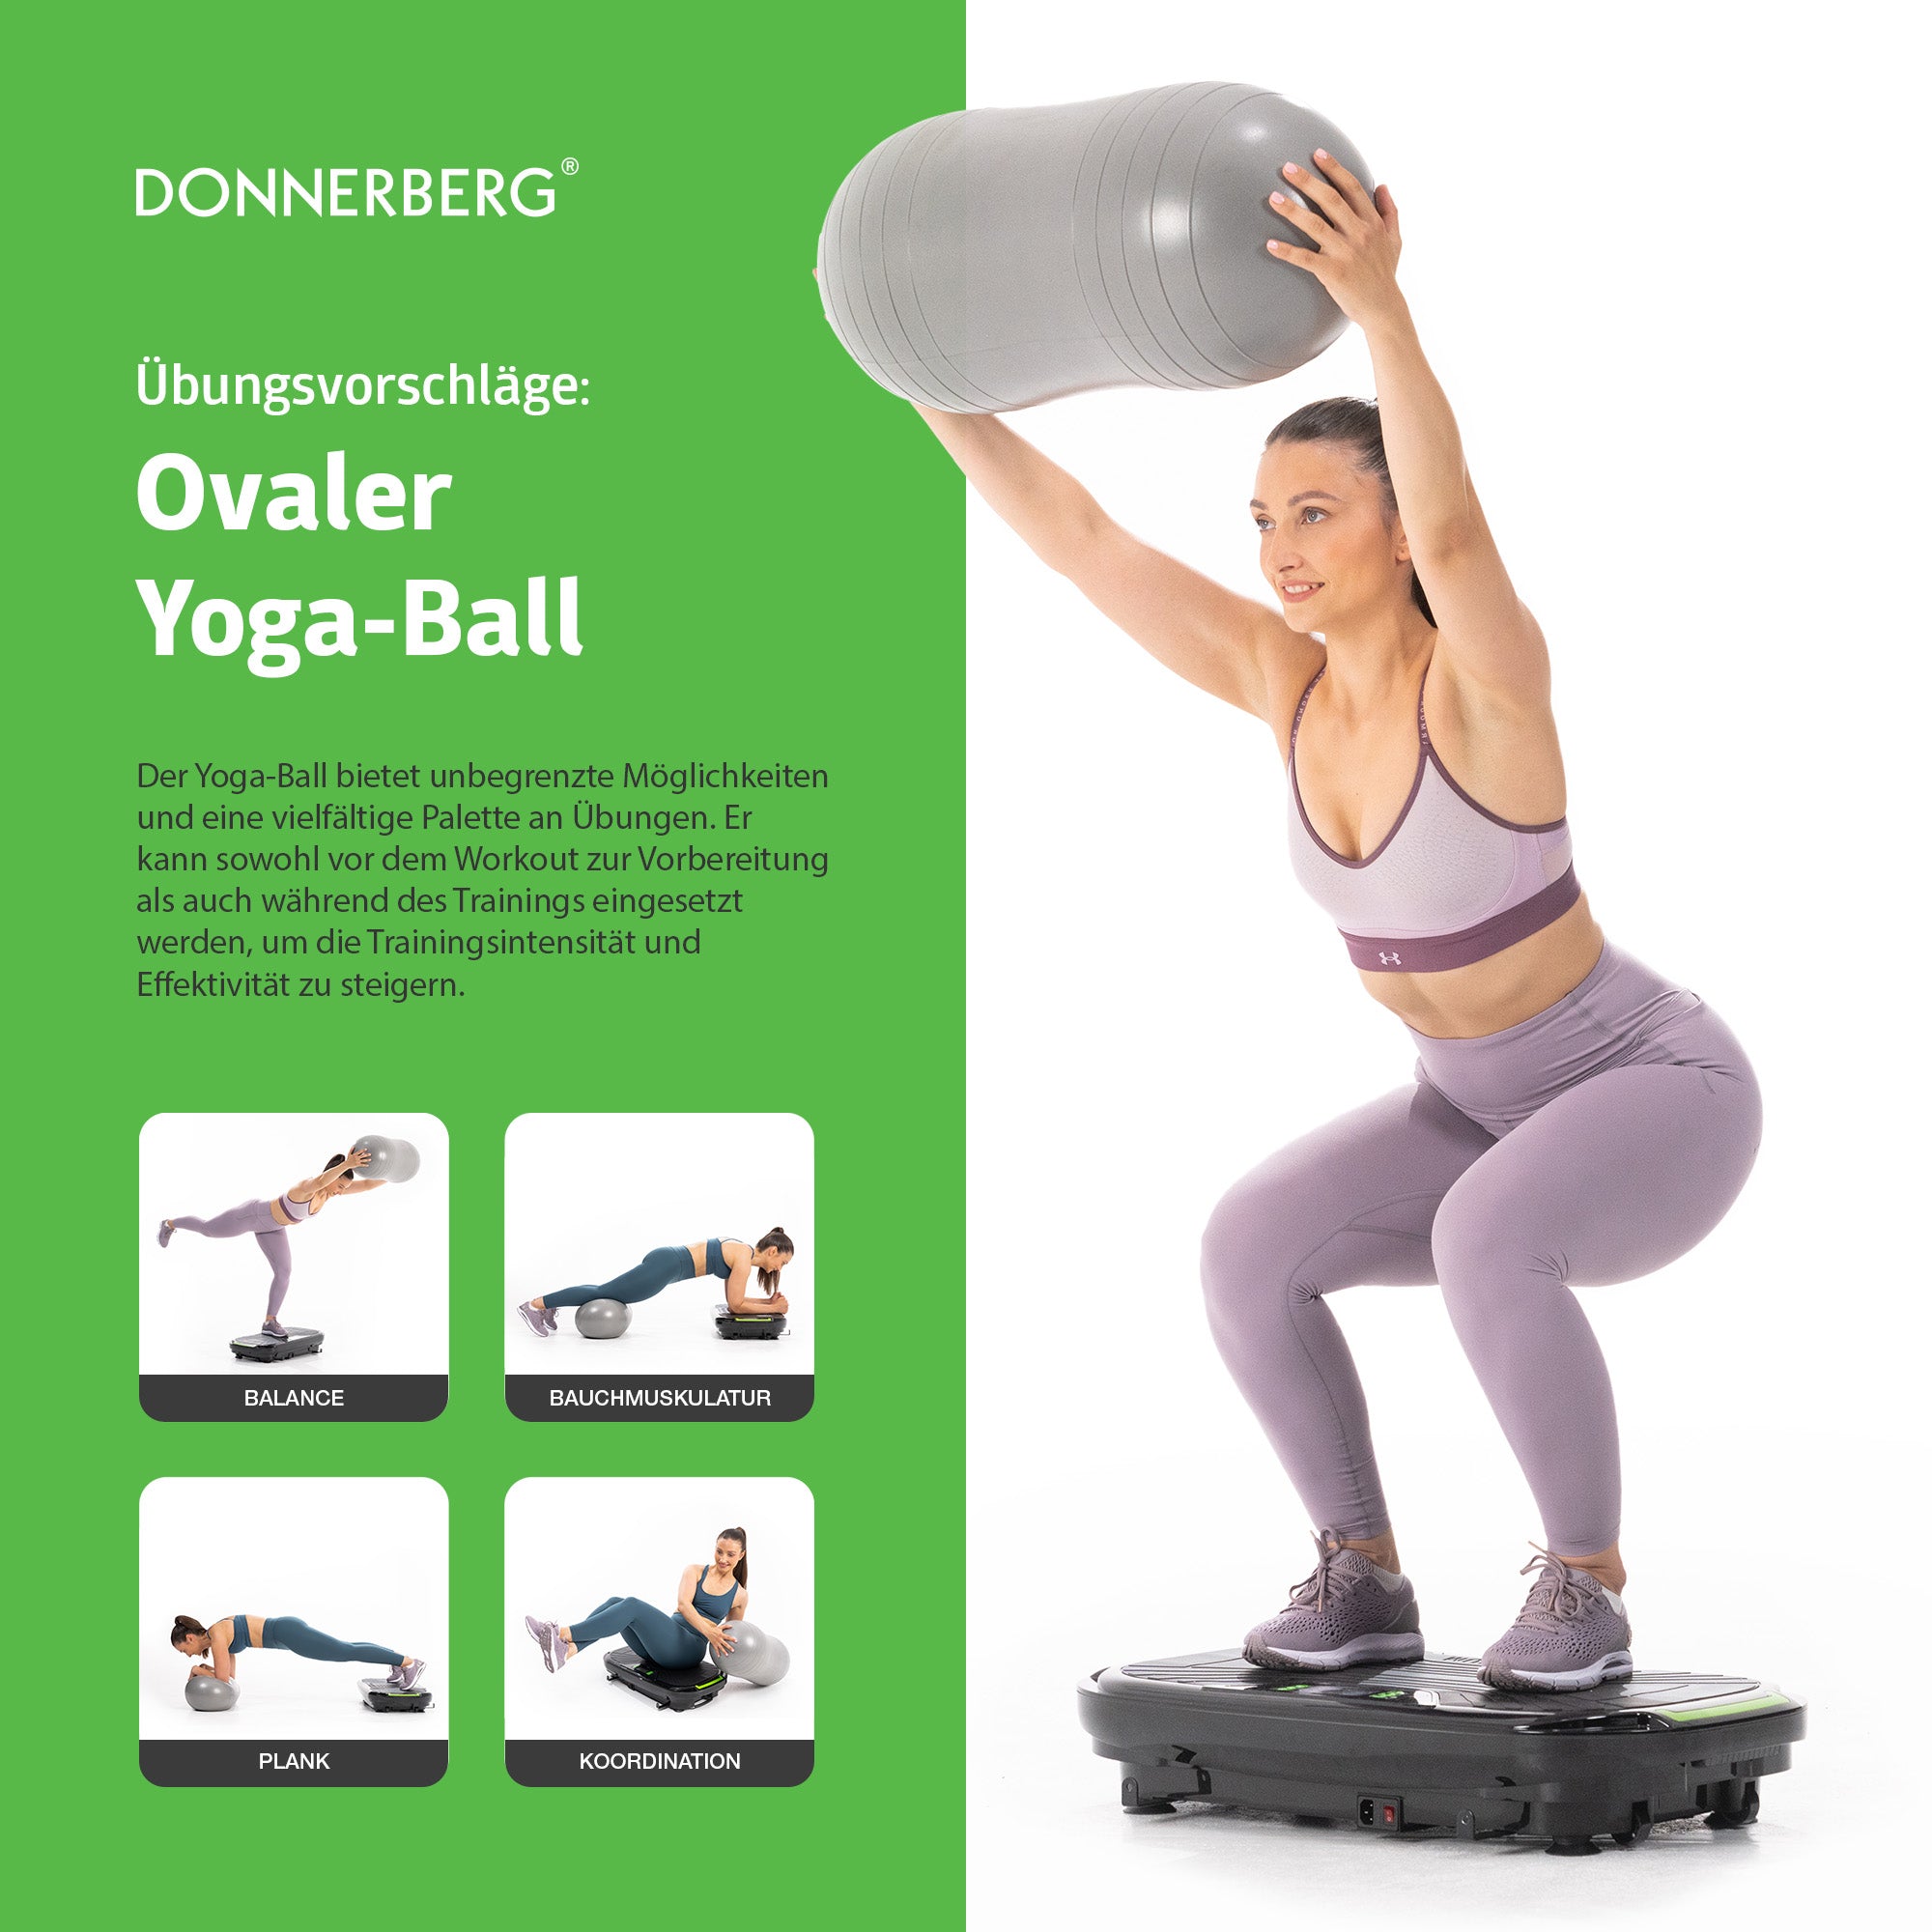 Examples of exercises with oval yoga ball on vibrating platform with seat